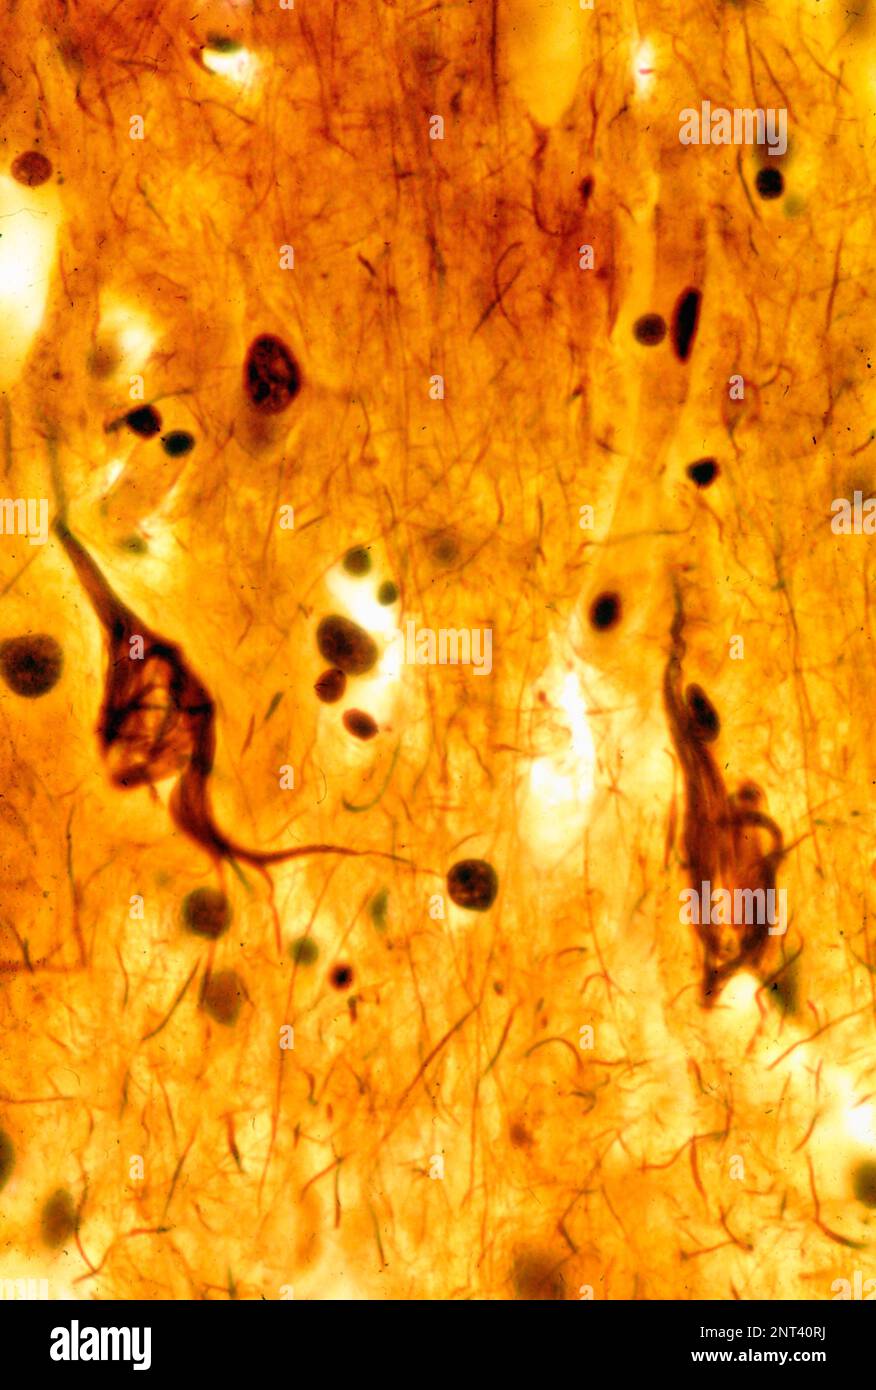 Light micrograph of a human cerebral cortex showing neurofibrillary tangles in two pyramidal neurons. Neurofibrillary tangles (NFTs) are a characteris Stock Photo